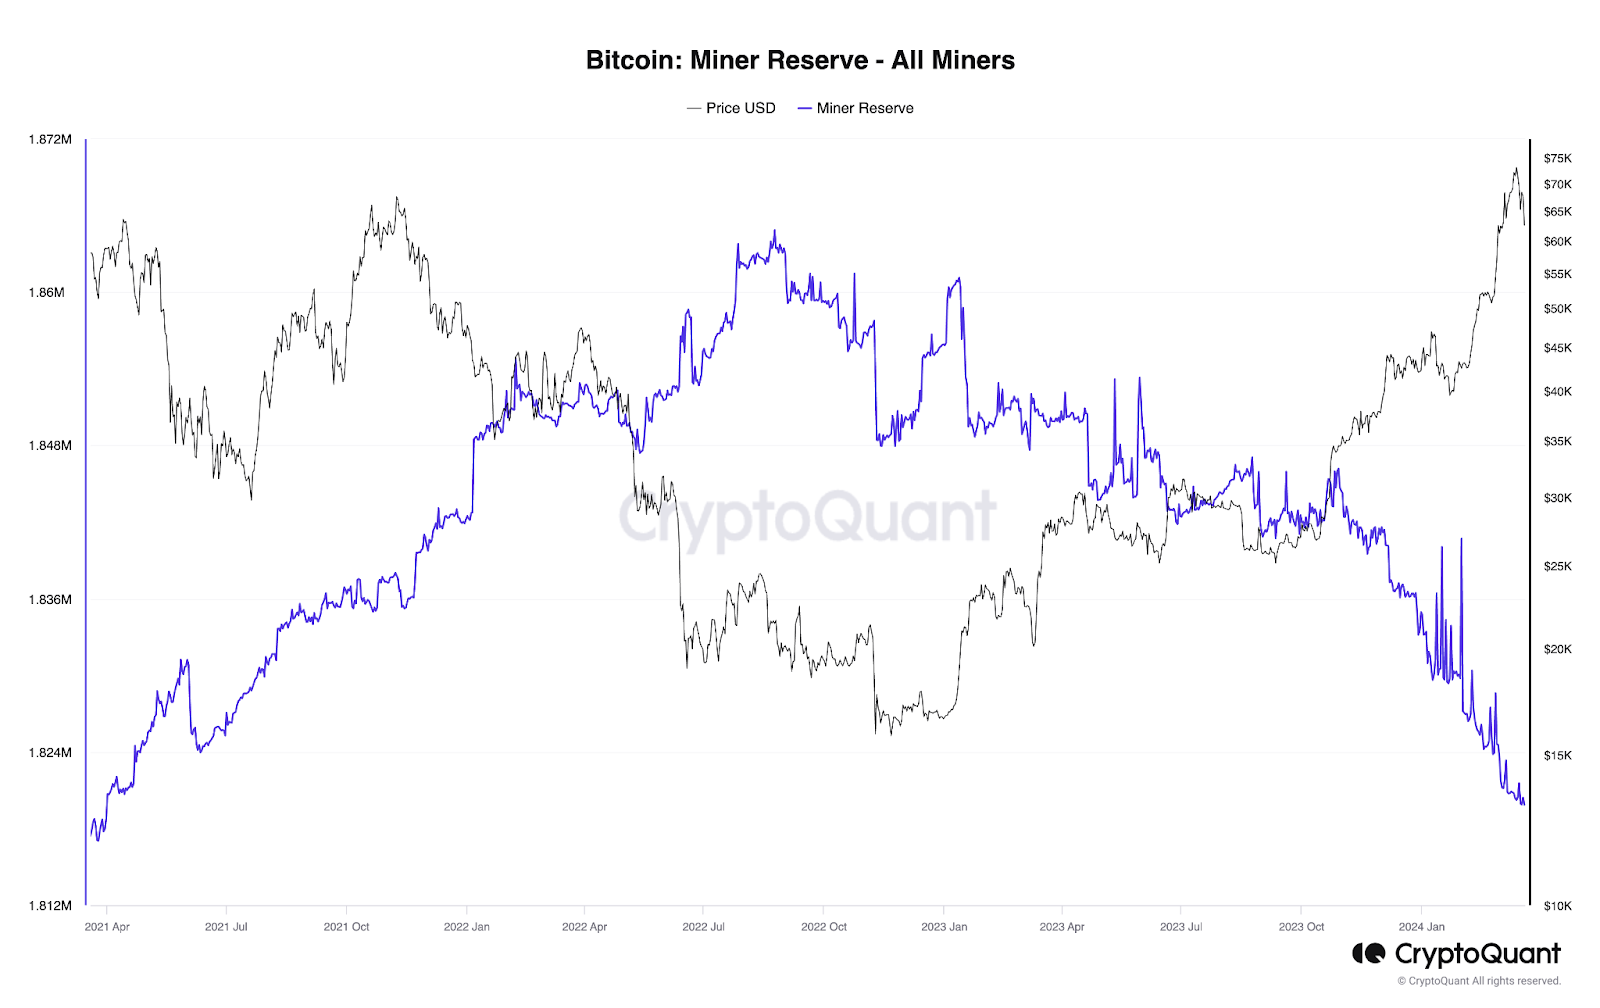 Miners’ Reserves Fall While Short-Term Traders Cash Out Profits: Is This Unfavorable for Bitcoin Price?